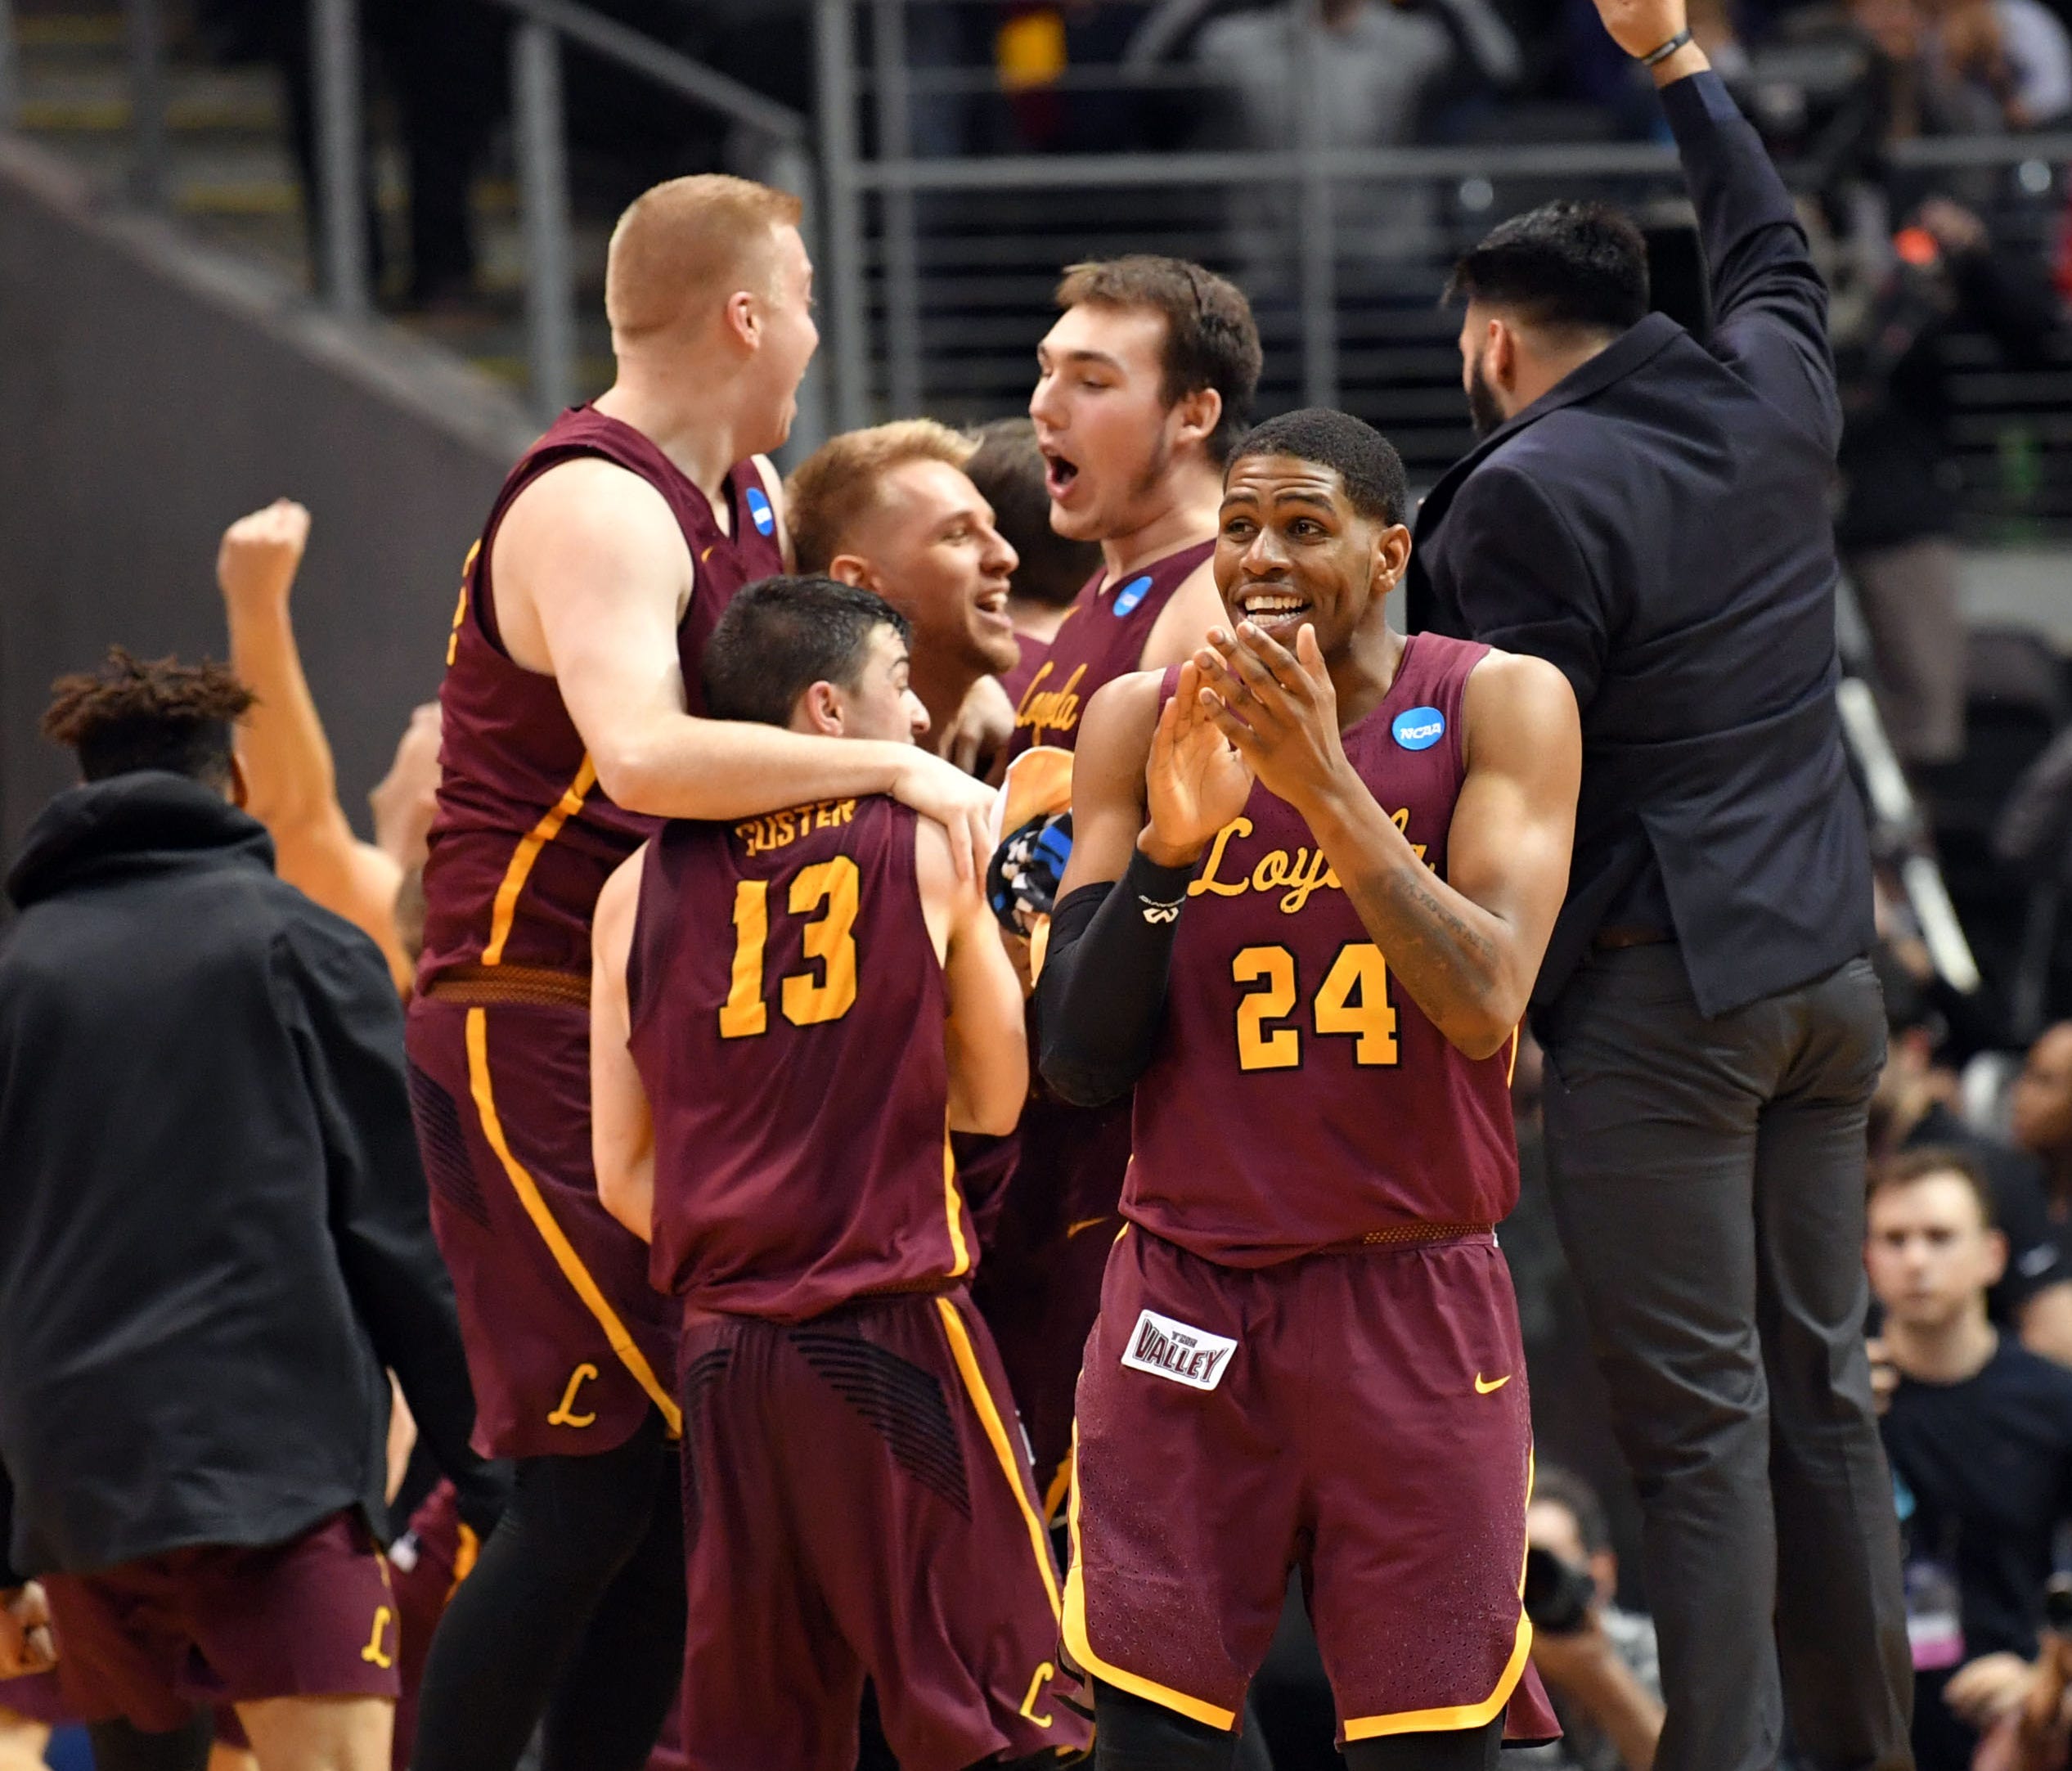 The Loyola Ramblers celebrate after defeating the Kansas State Wildcats in the championship game of the South regional of the 2018 NCAA Tournament at Philips Arena.